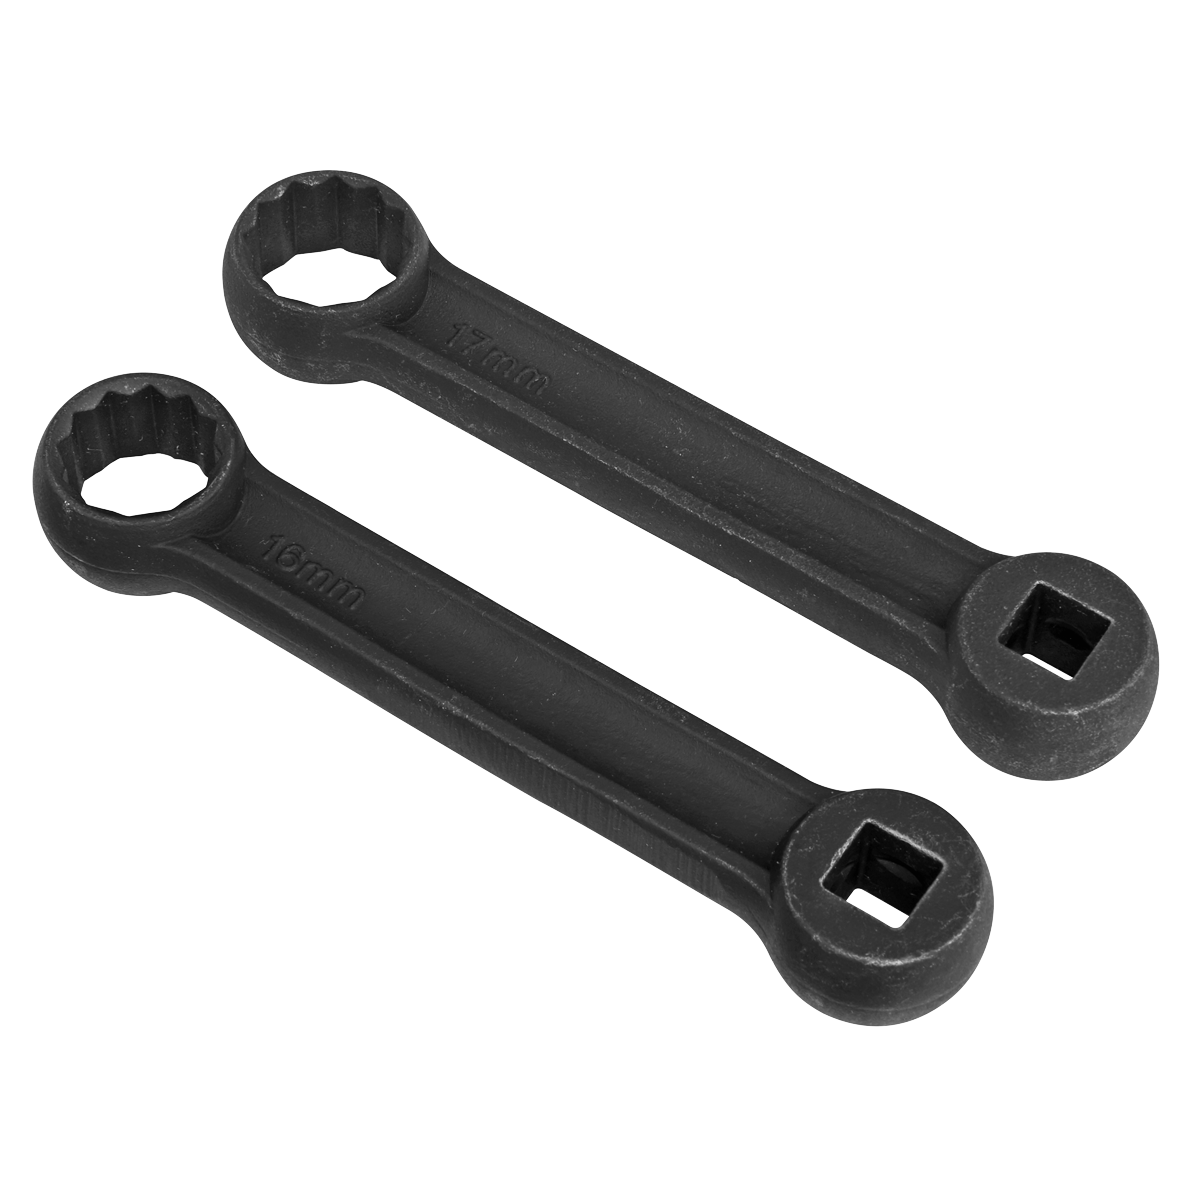 12-Point ring spanner with Internal 3/8" square drive